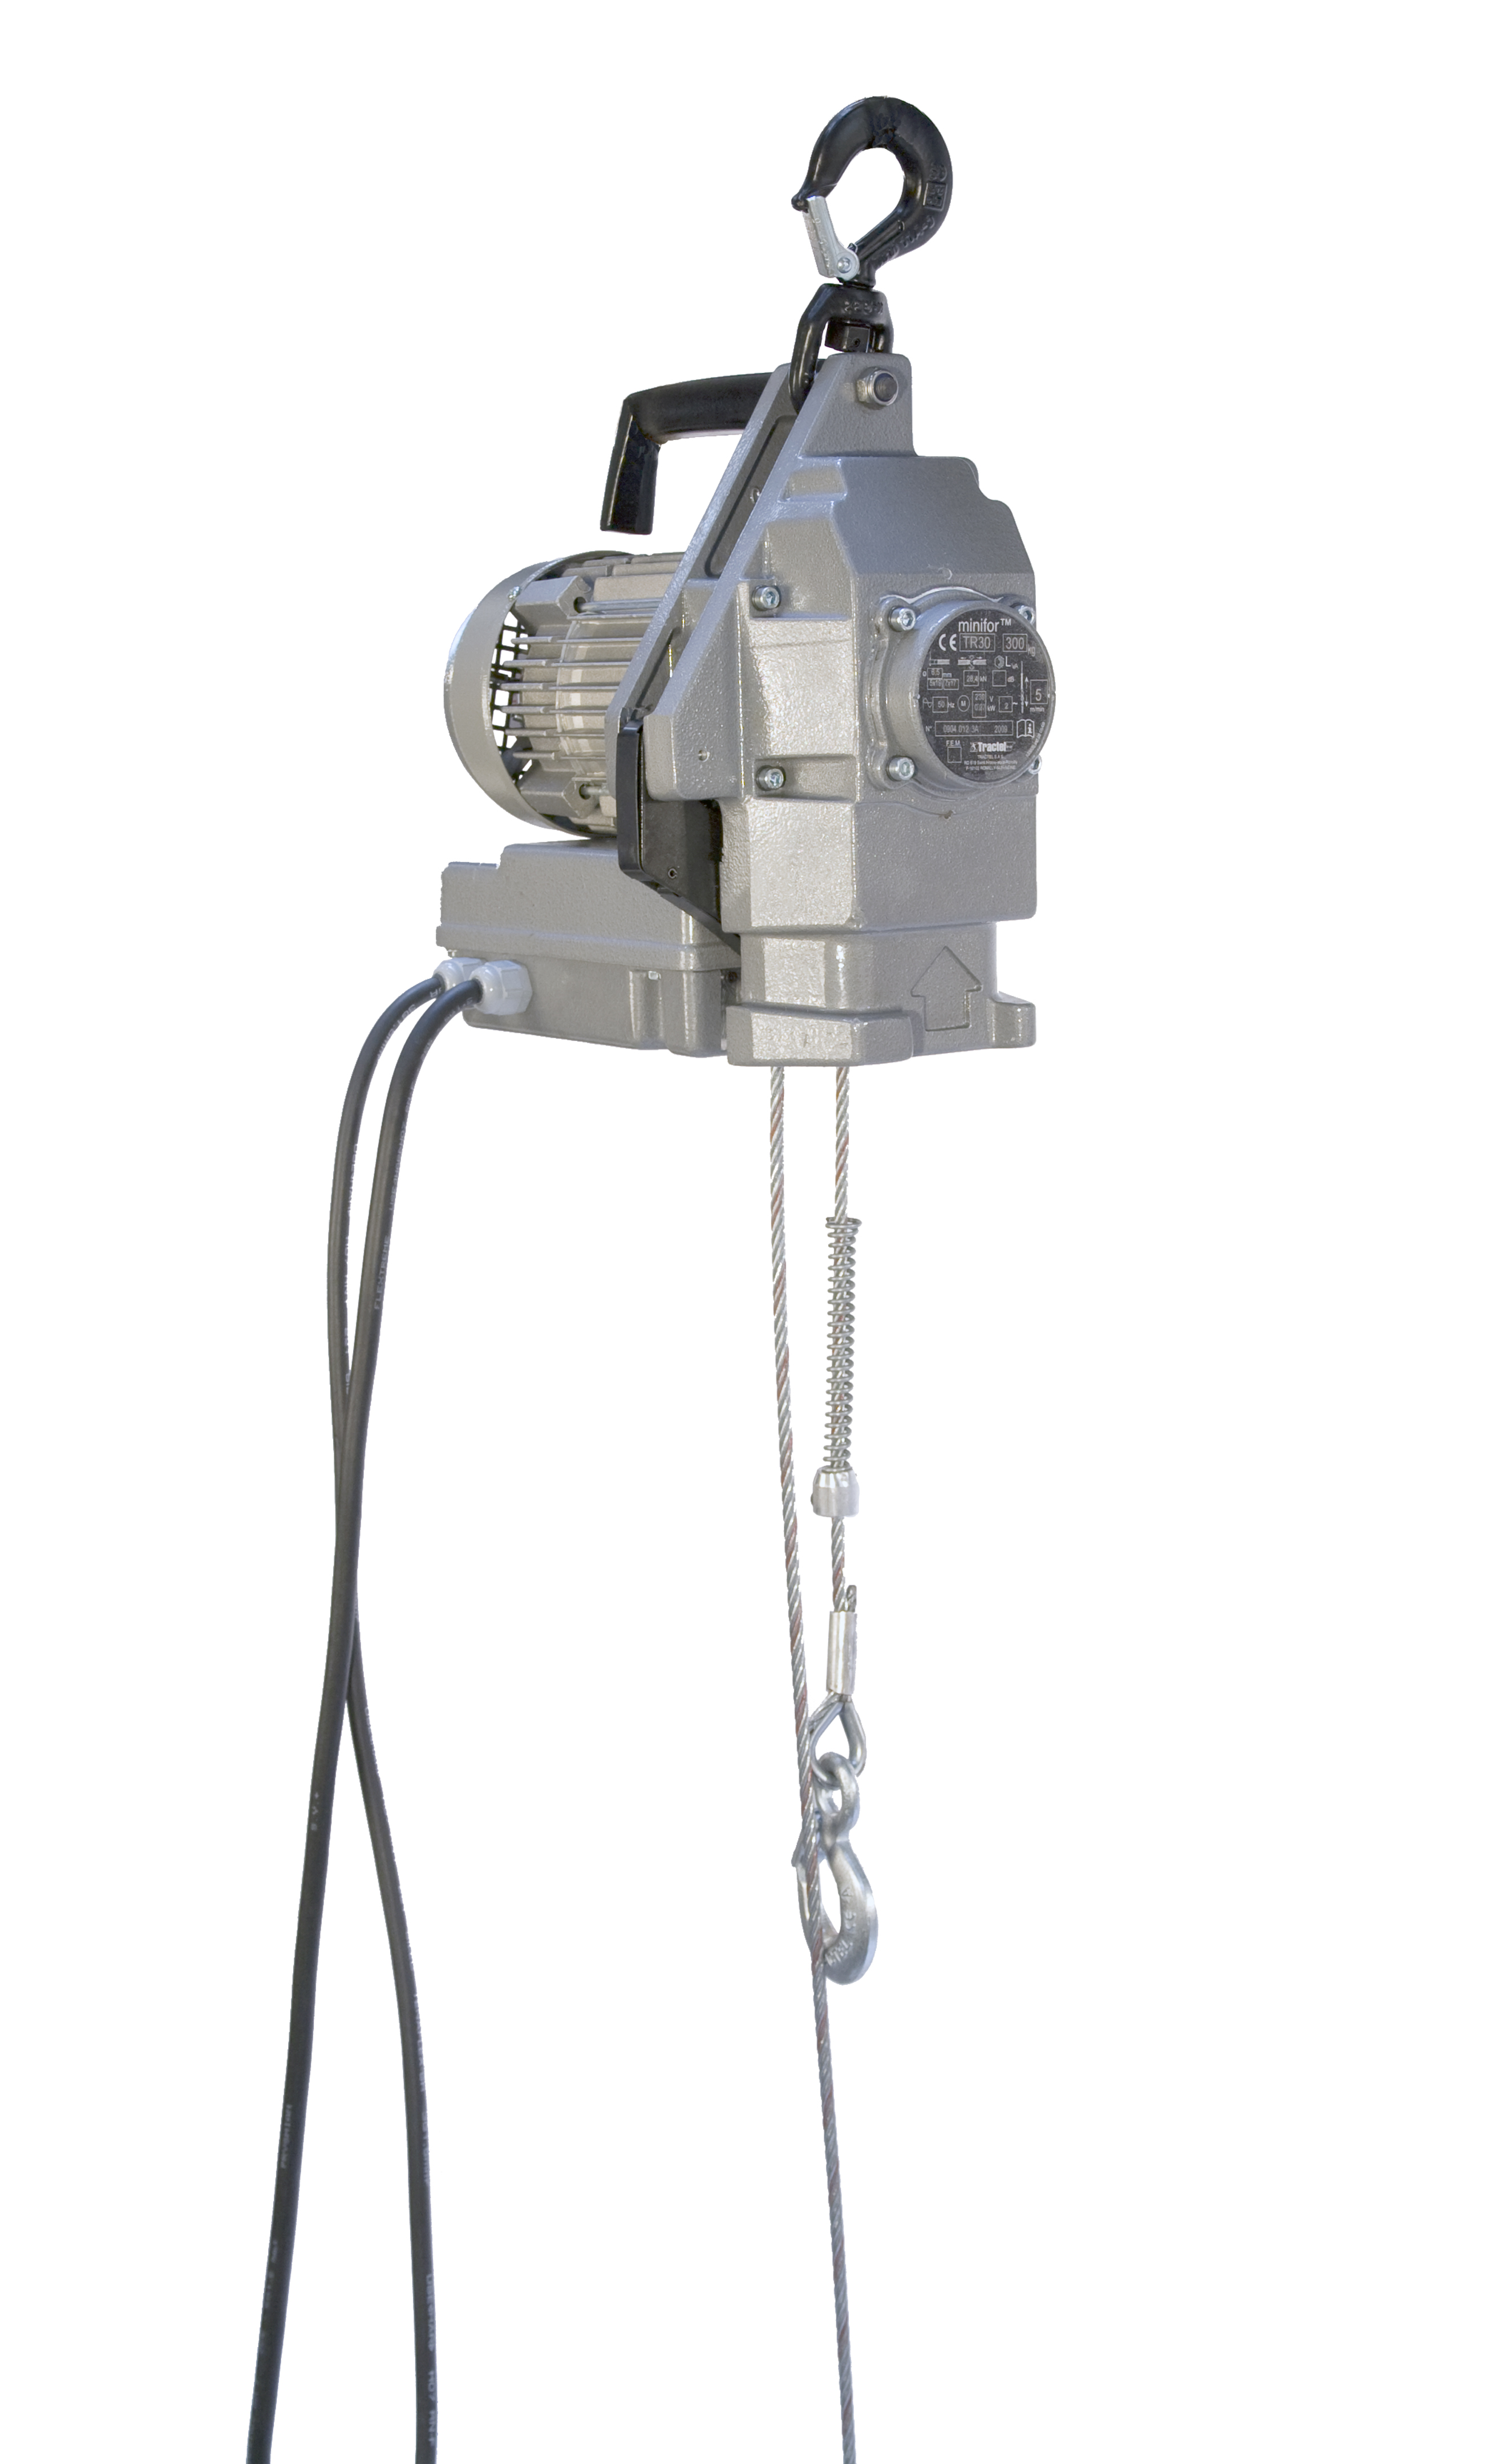 Minifor TR30 Hoist for hire or for sale